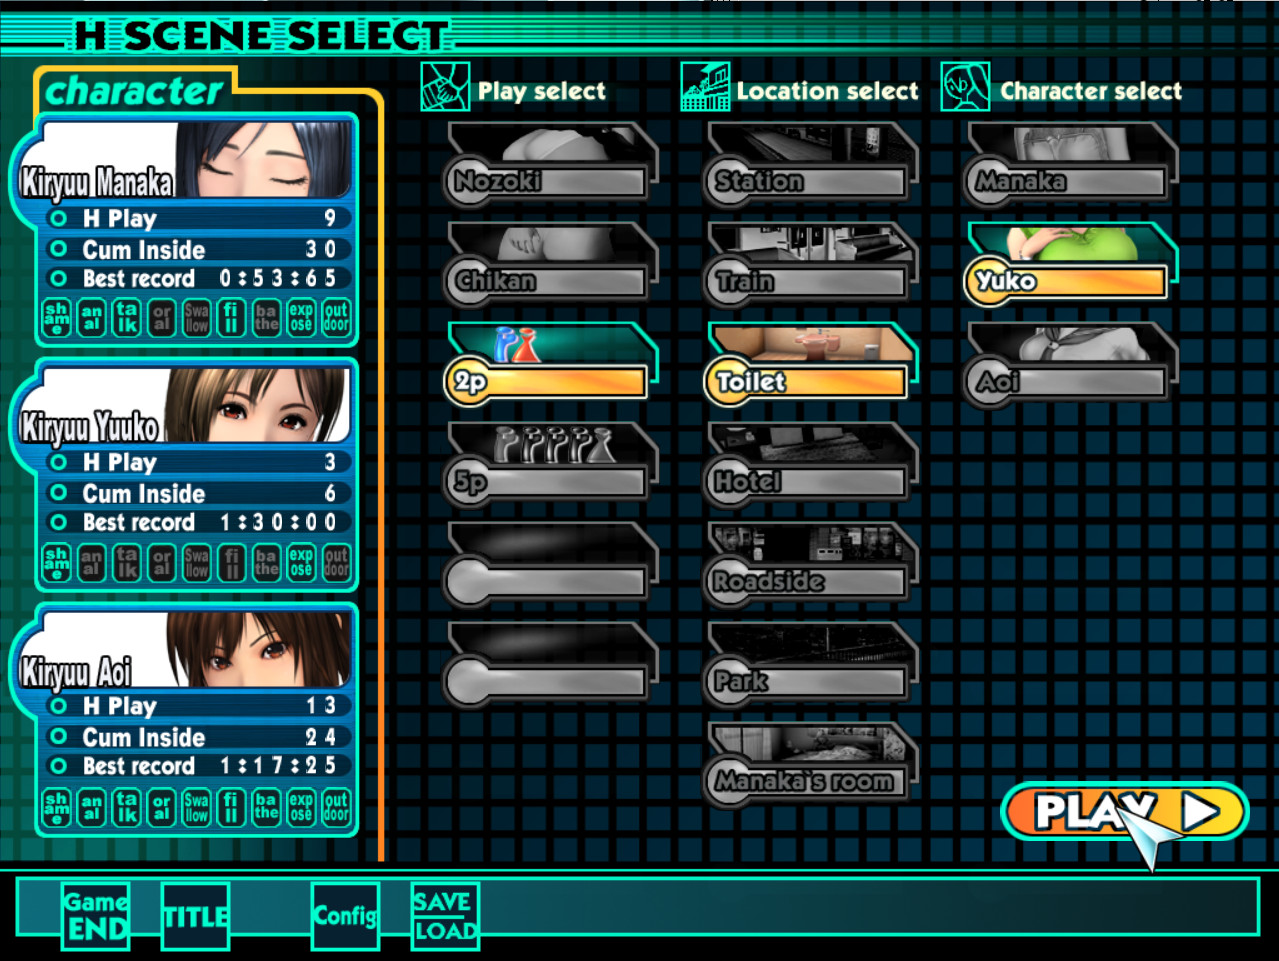 The gameplay and victim selection screen